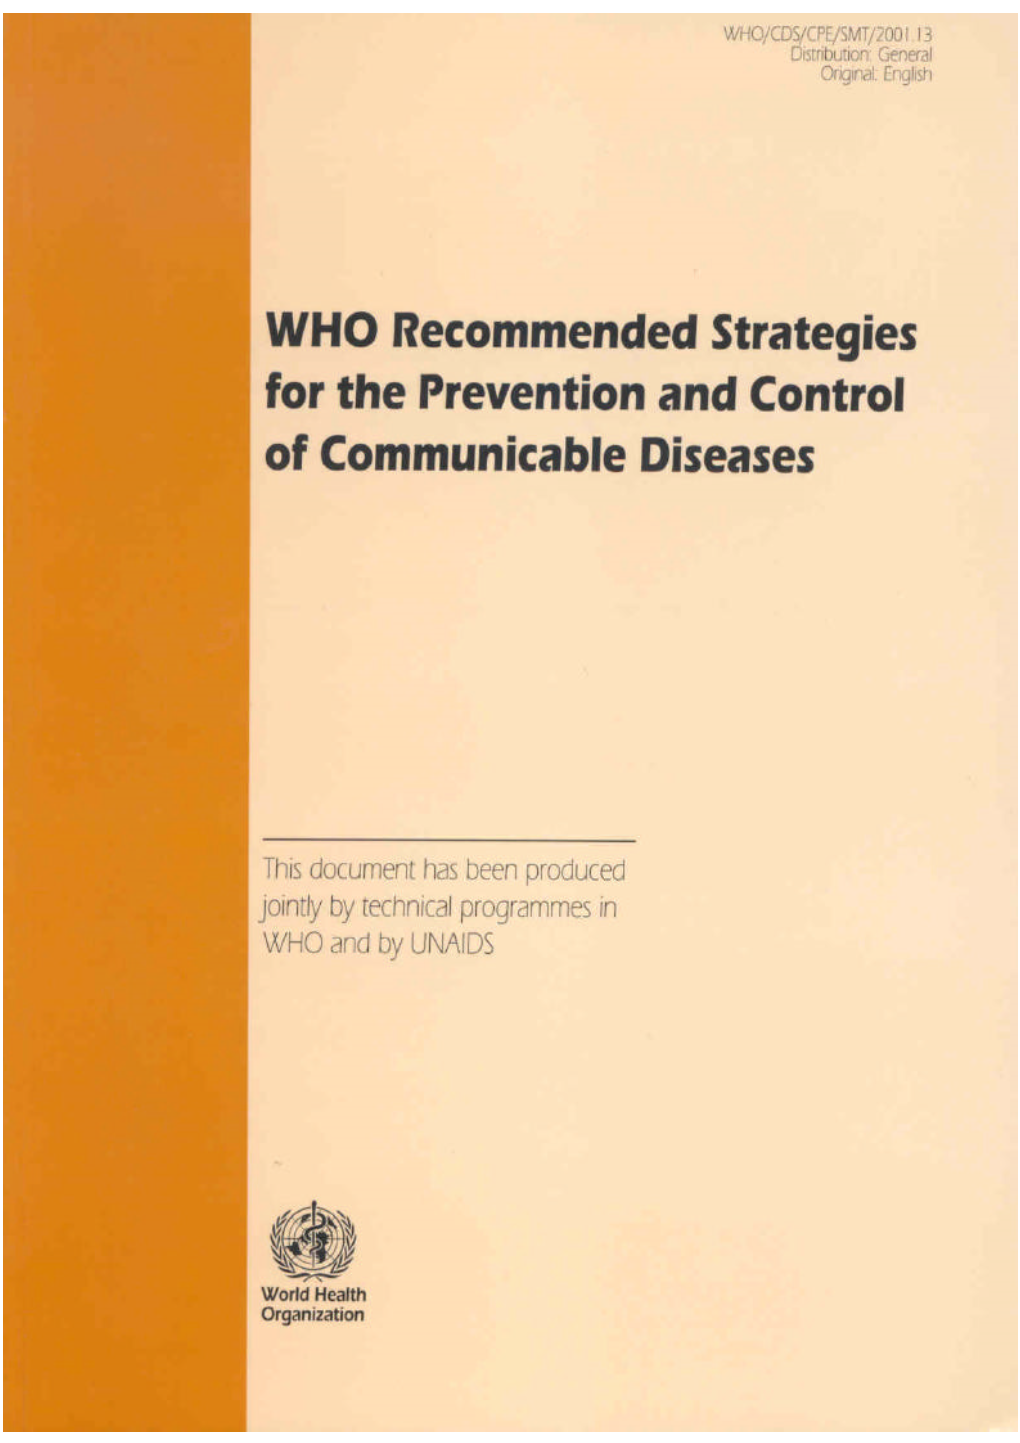 WHO Recommended Strategies for the Prevention and Control of Communicable Diseases